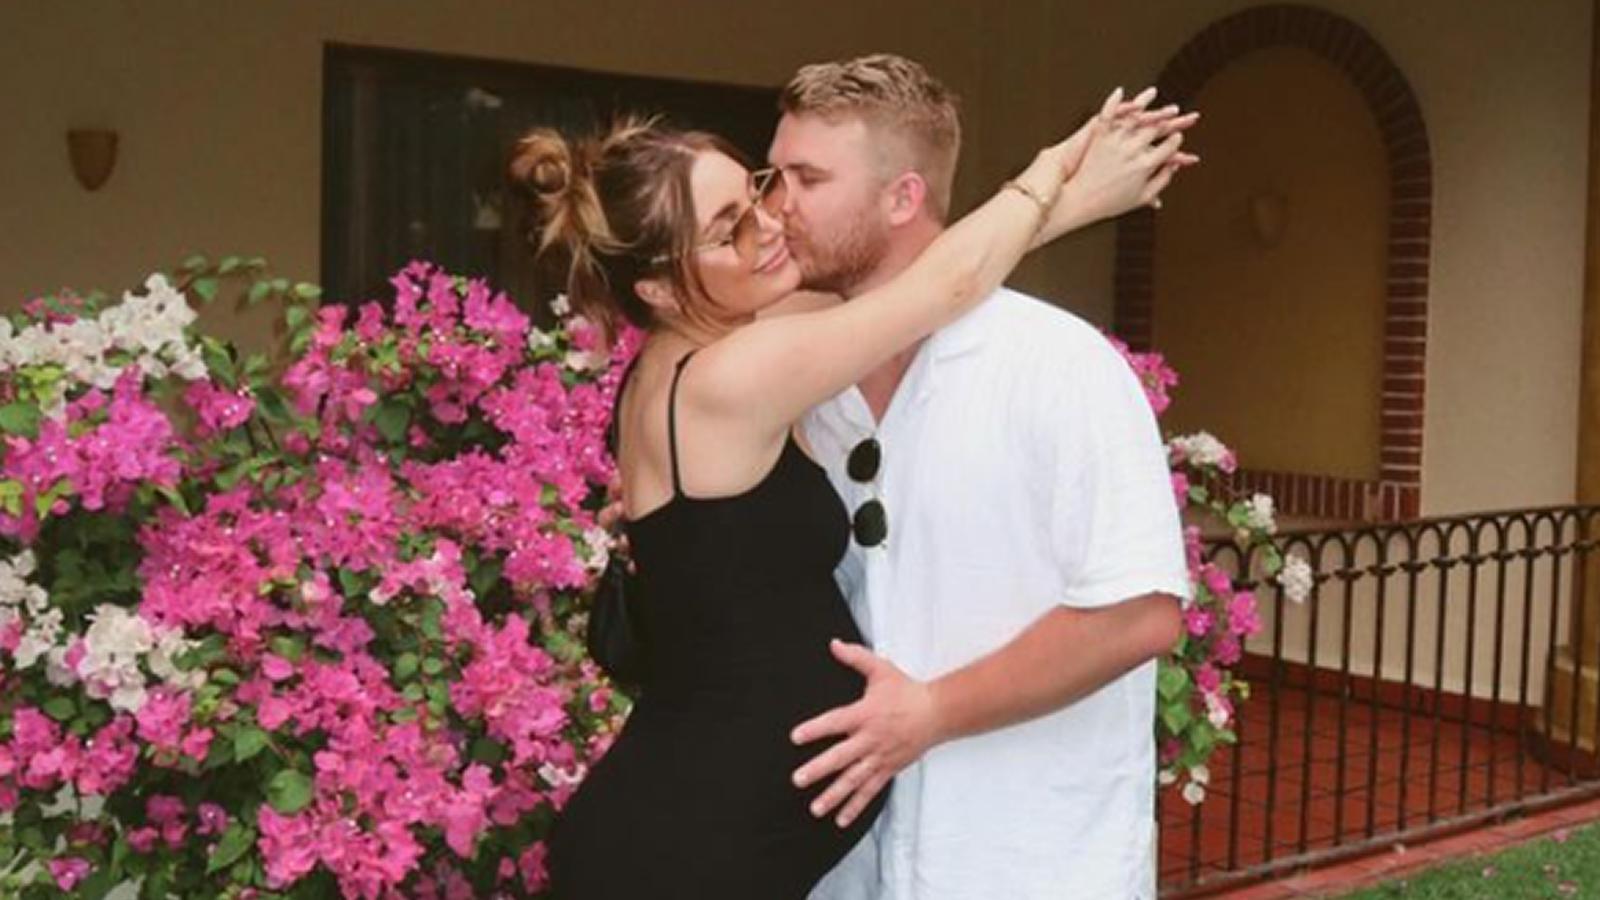 YouTuber Aspyn Ovard files for divorce after third baby with Parker Ferris